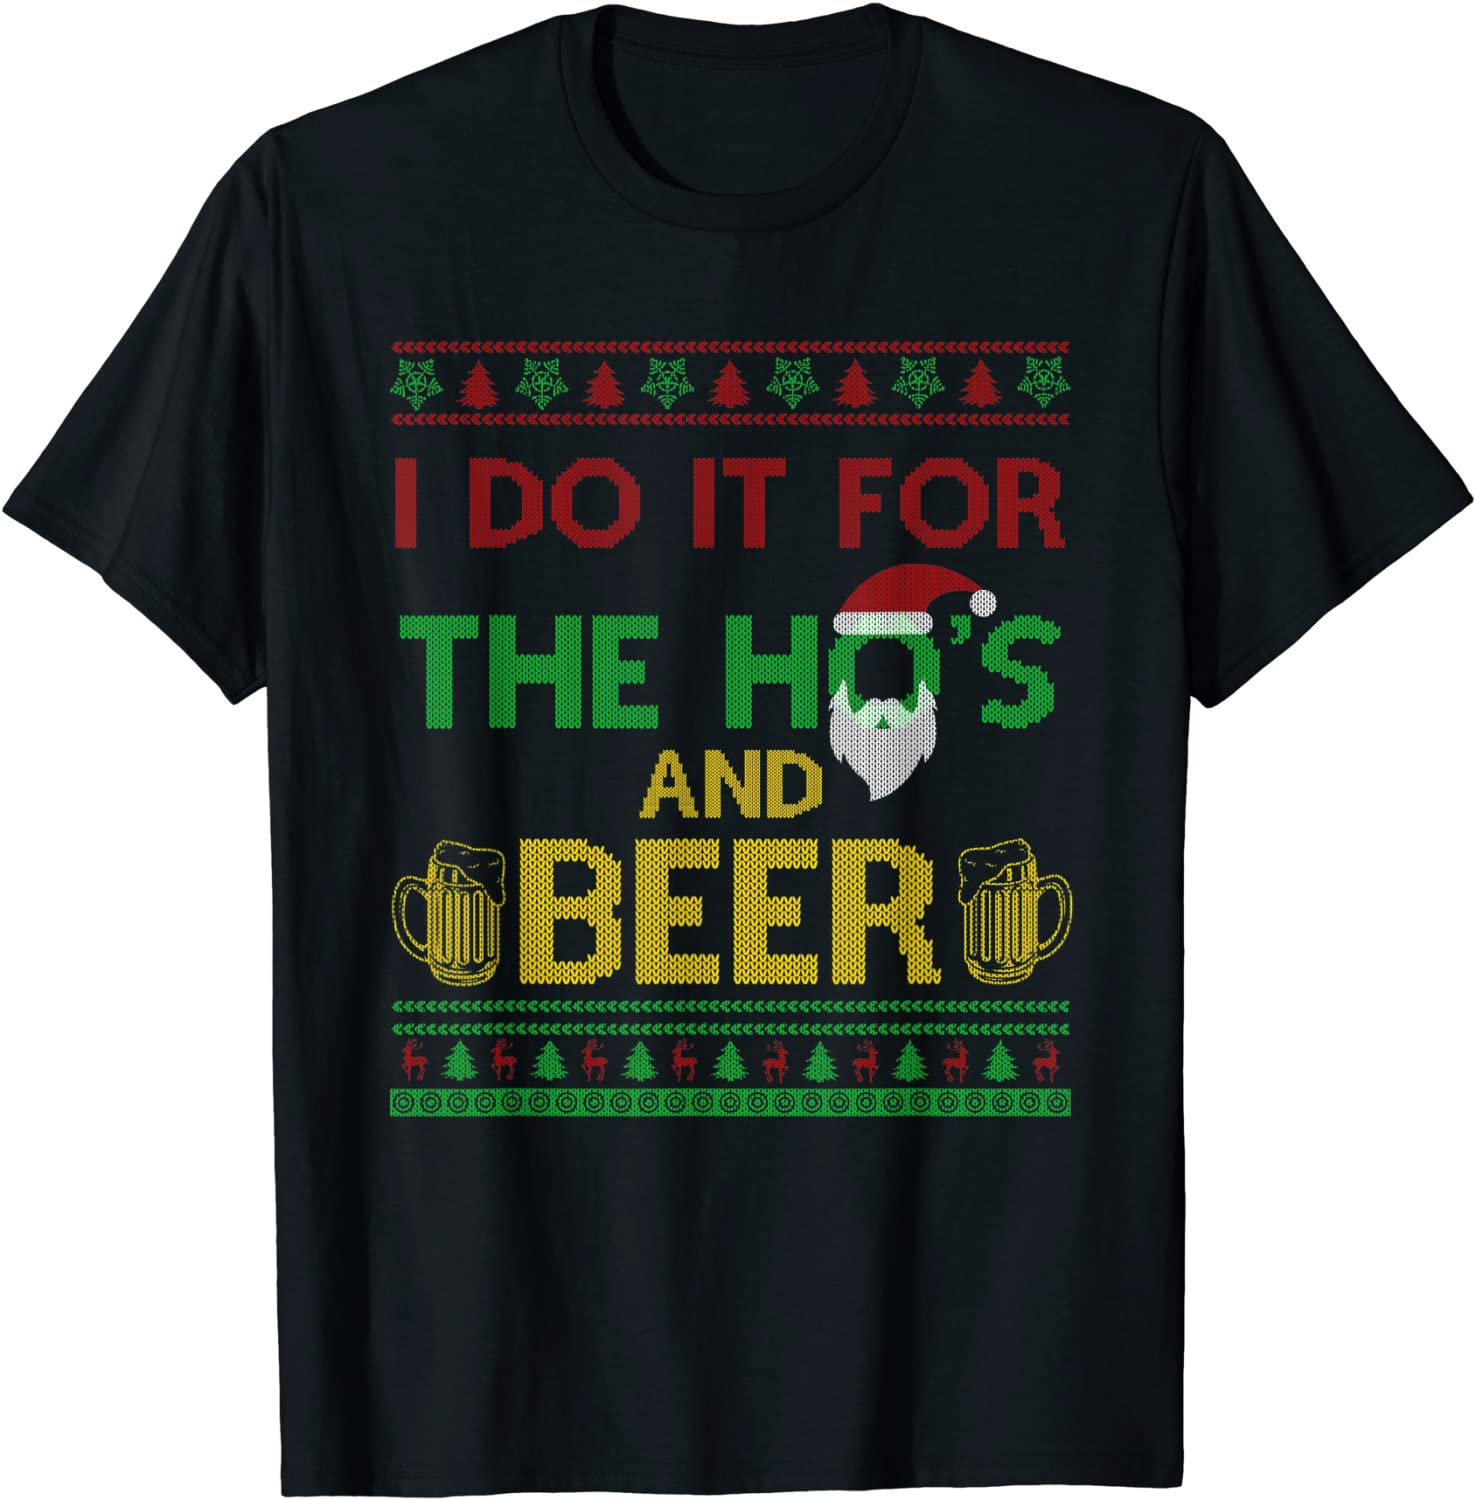 I Do It For The Ho's And Beer T-Shirt